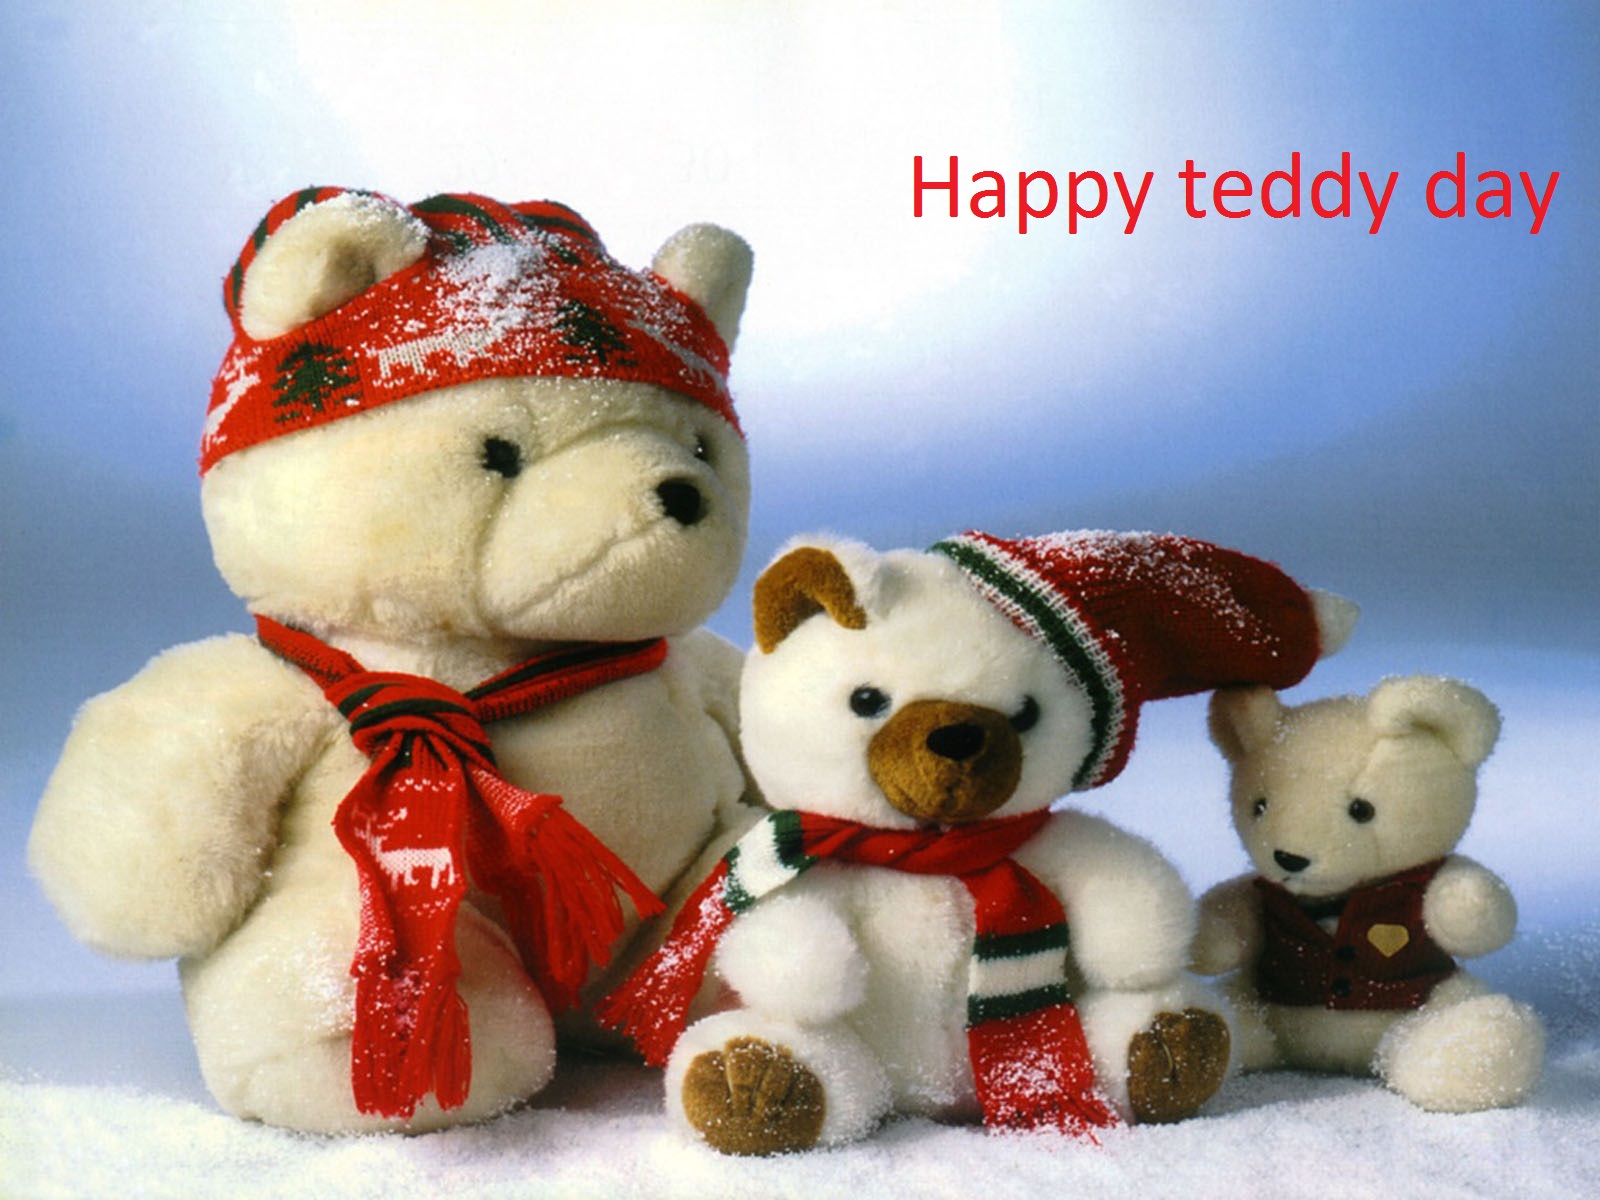 happy teddy bear day hd wallpapers free download 